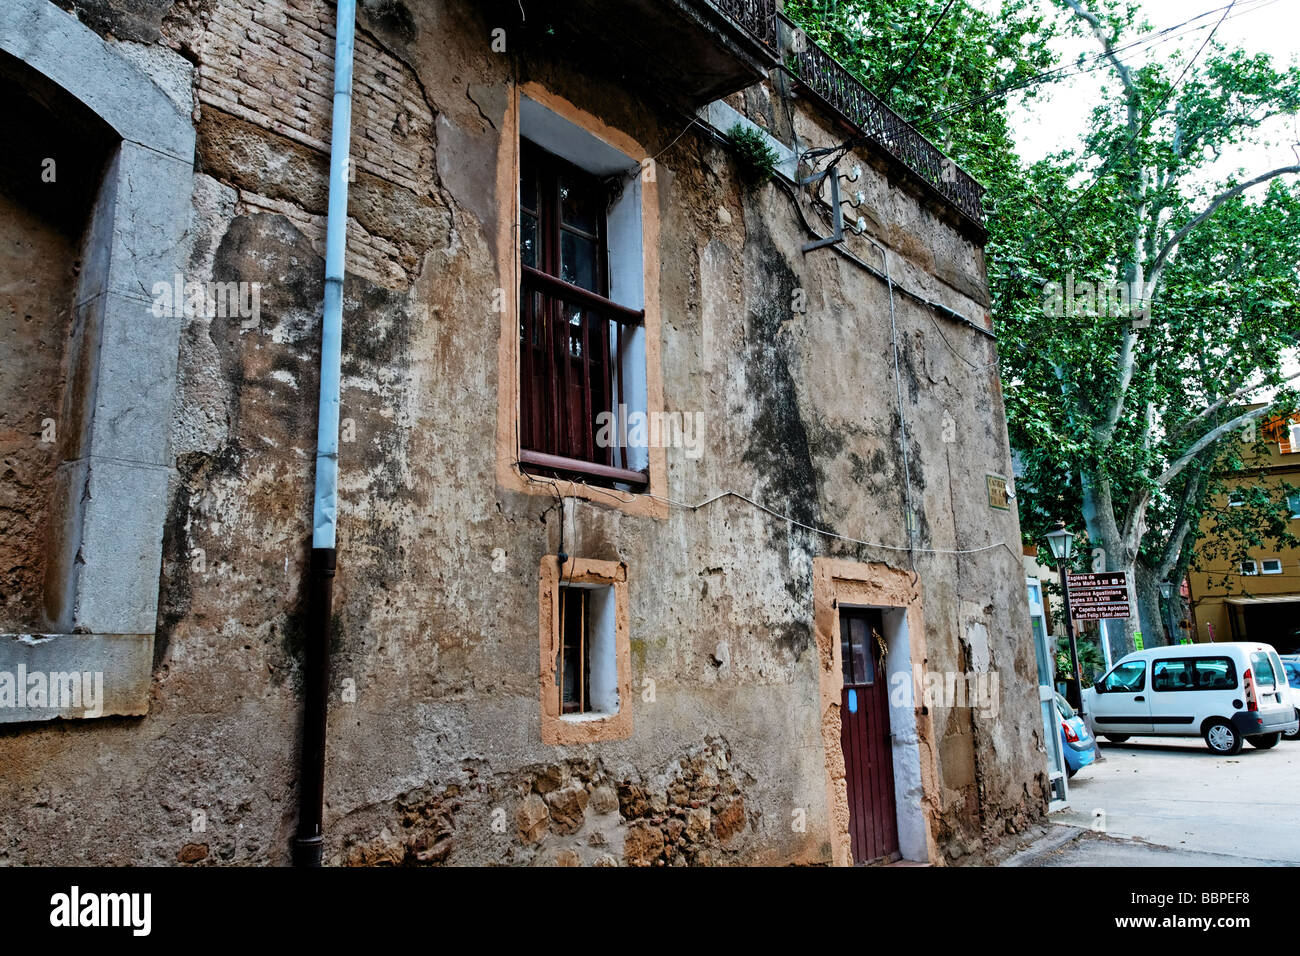 Old building in Llado, near Figueres, Northern Spain. Stock Photo